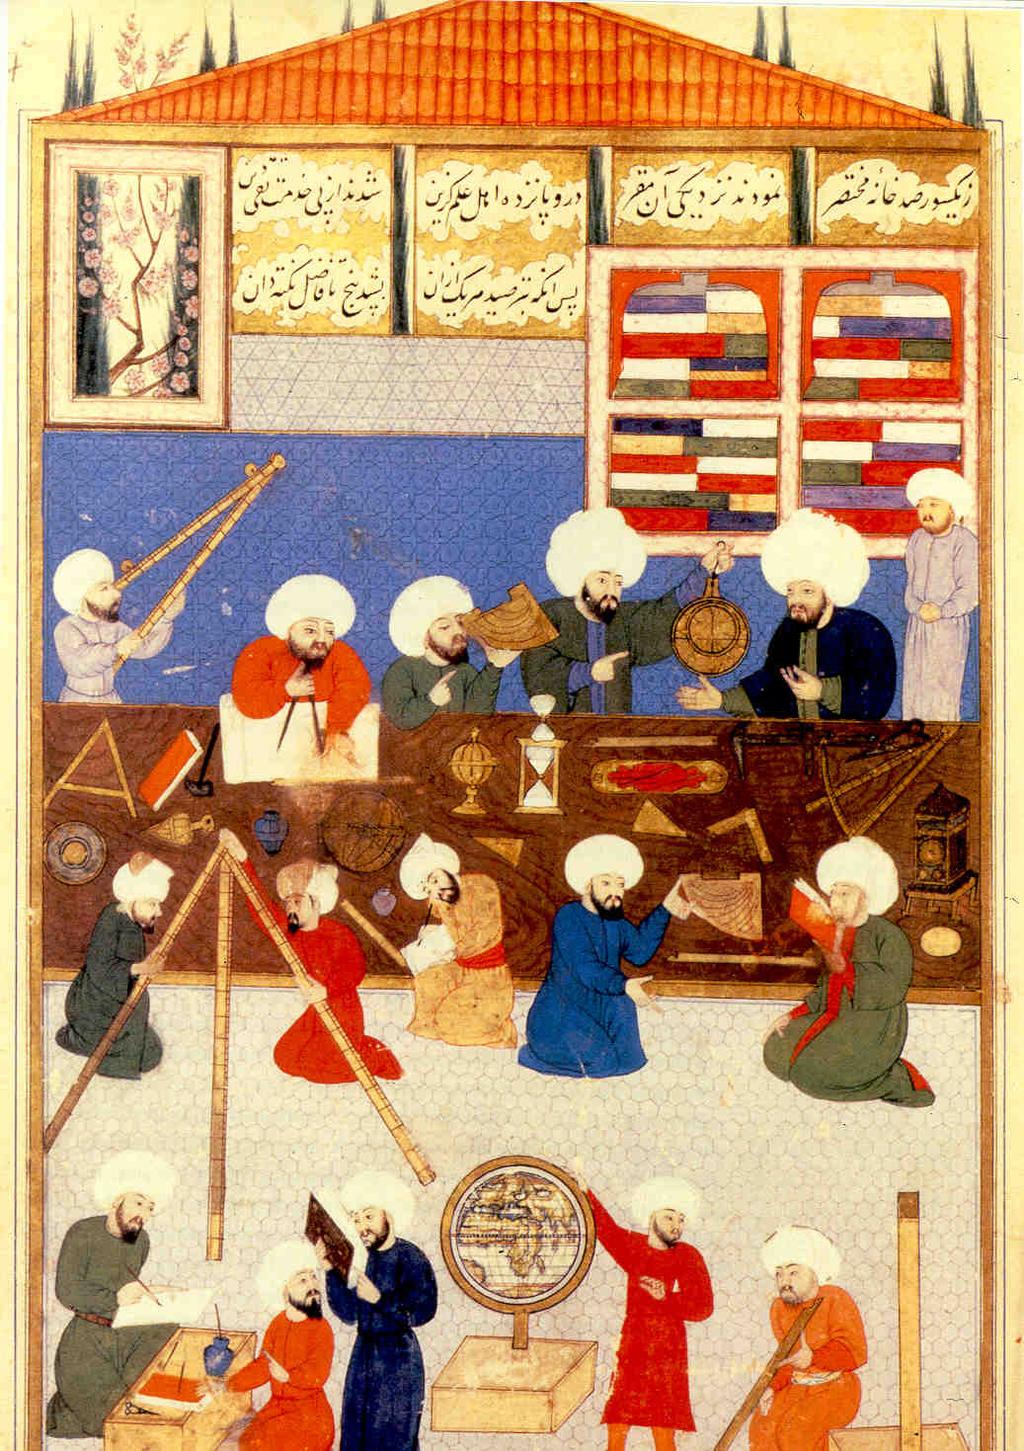 name MEASURING ANGLES Fig 1: Islamic Astronomers of the Middle Ages in an Observatory in Istanbul. Fig 2: Tycho Brahe in Denmark. His observations were later used by Kepler.